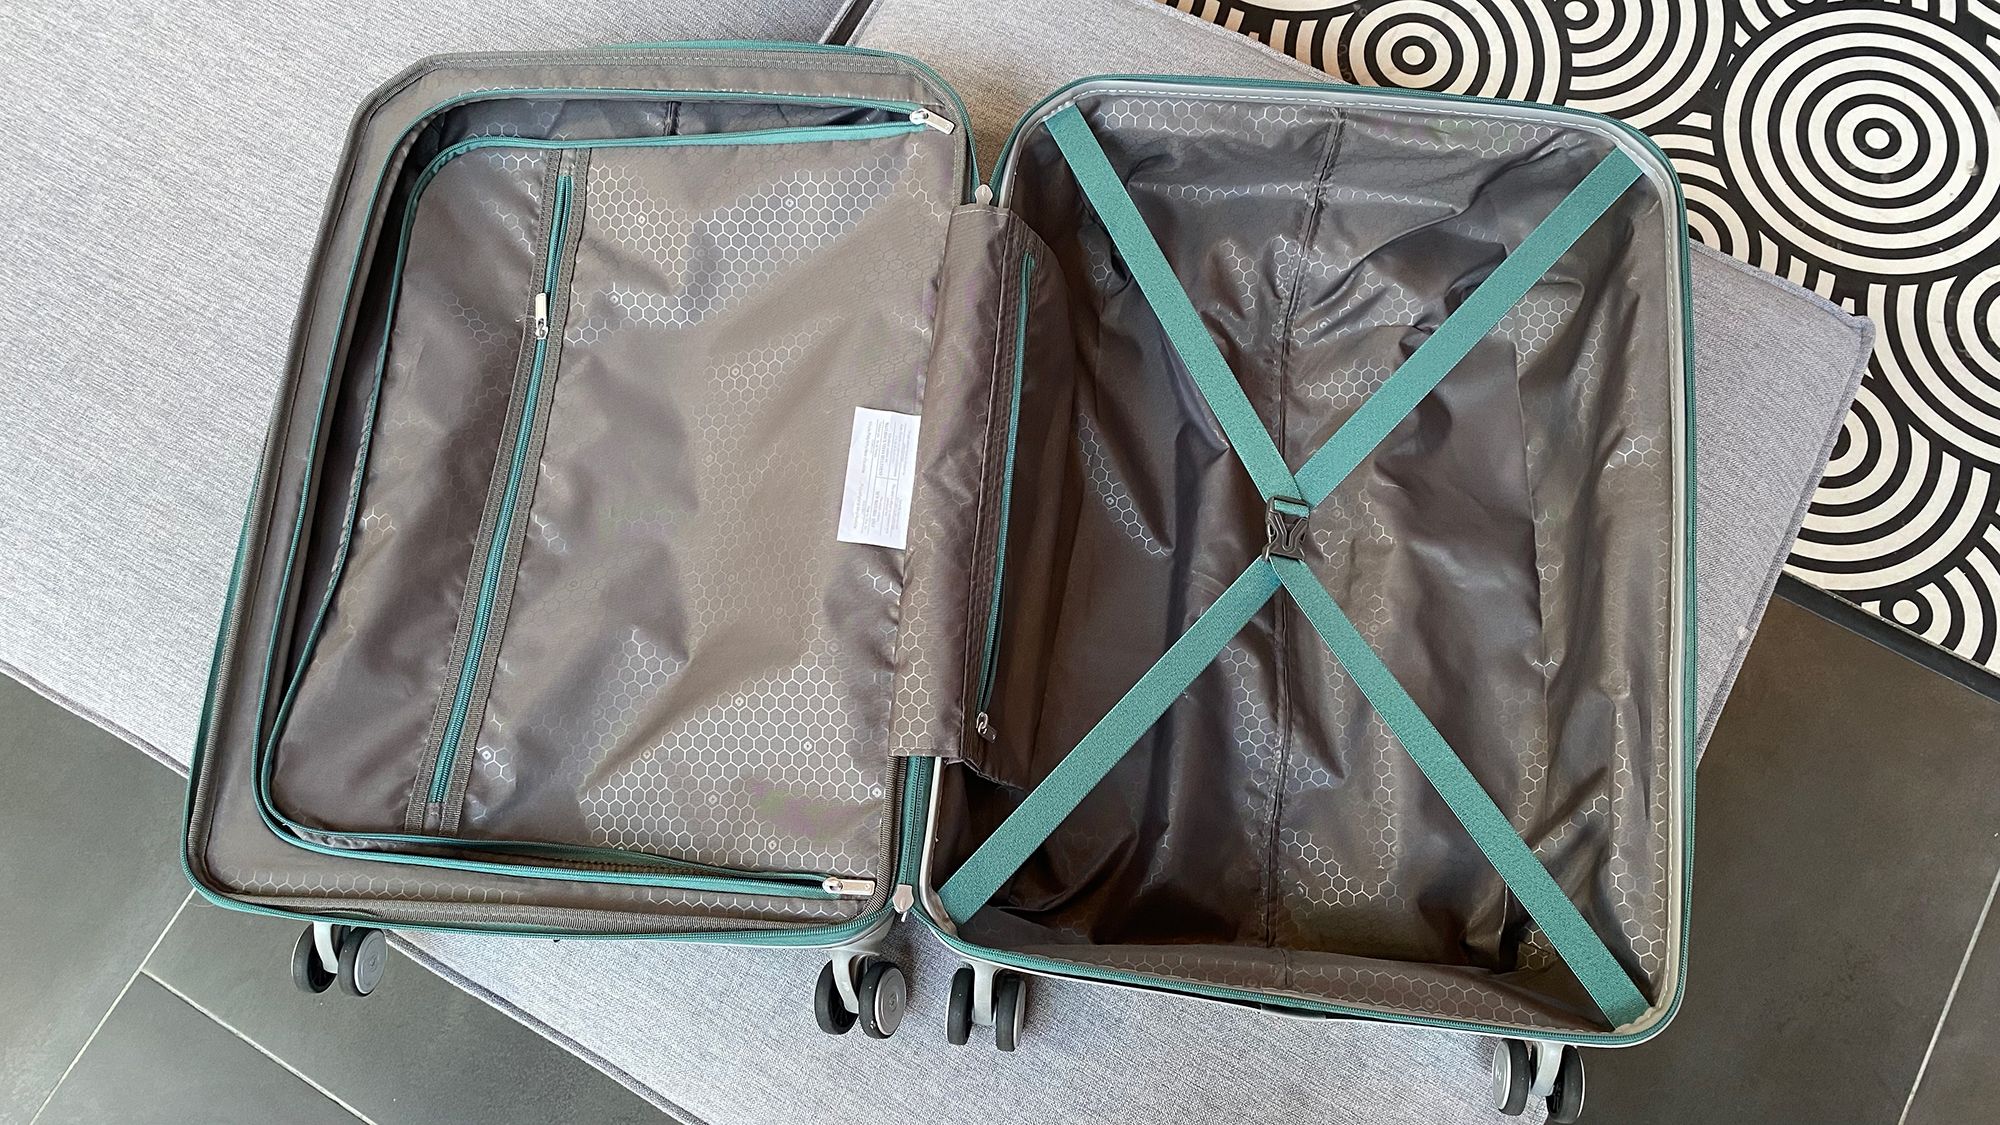 The 8 Best Checked Luggage Bags, Tested and Reviewed